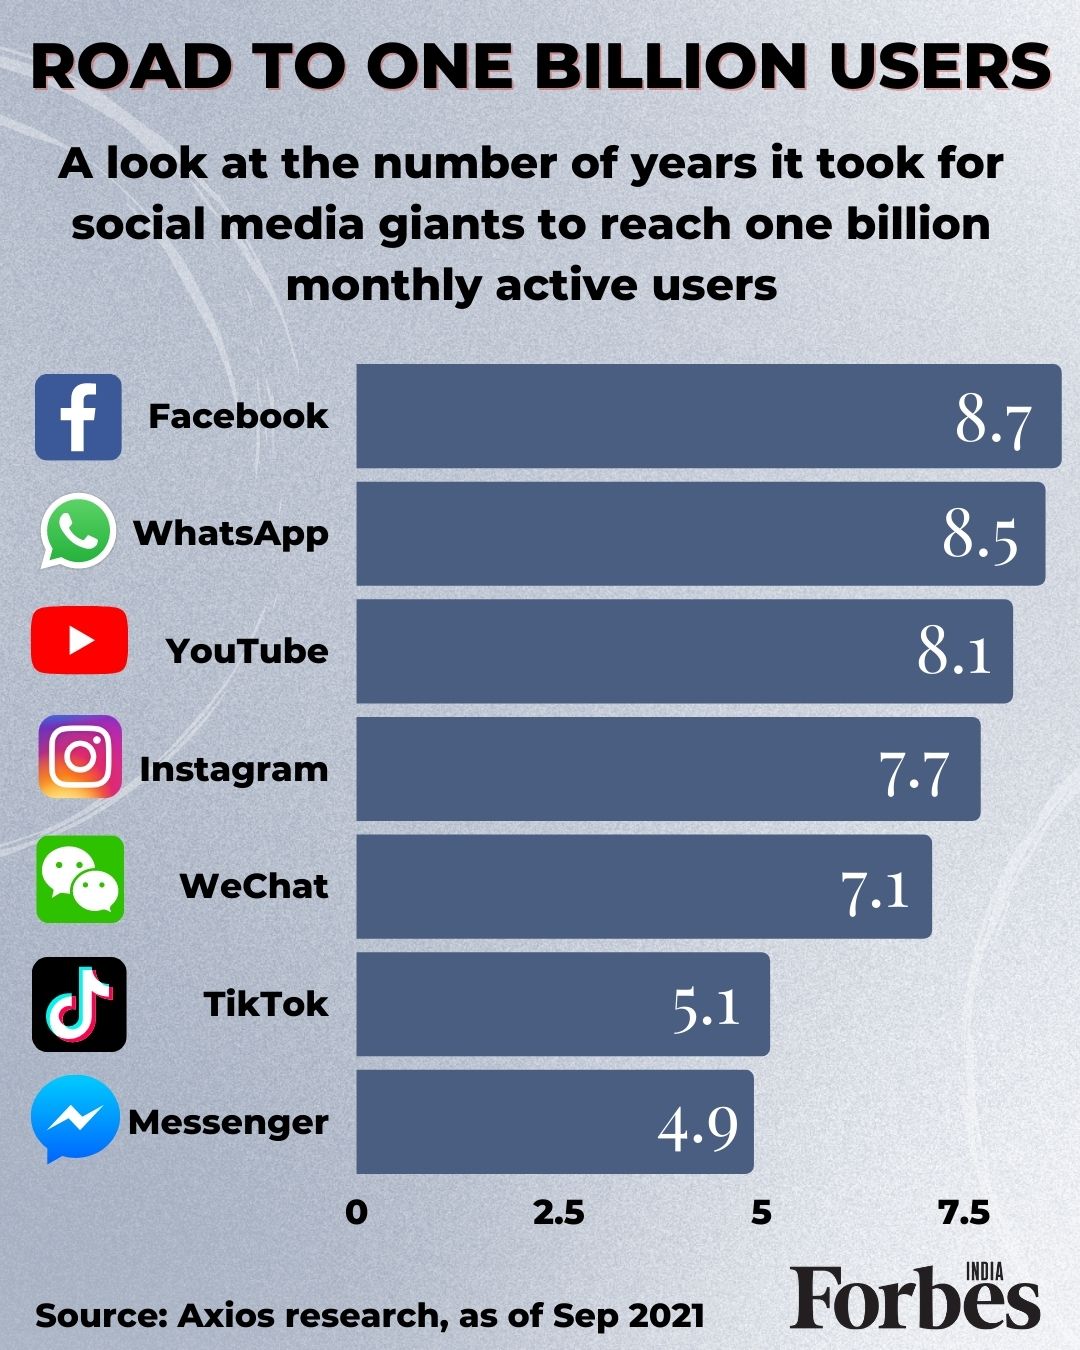 Facebook took the longest to reach a billion monthly active users; TikTok, Messenger, the least